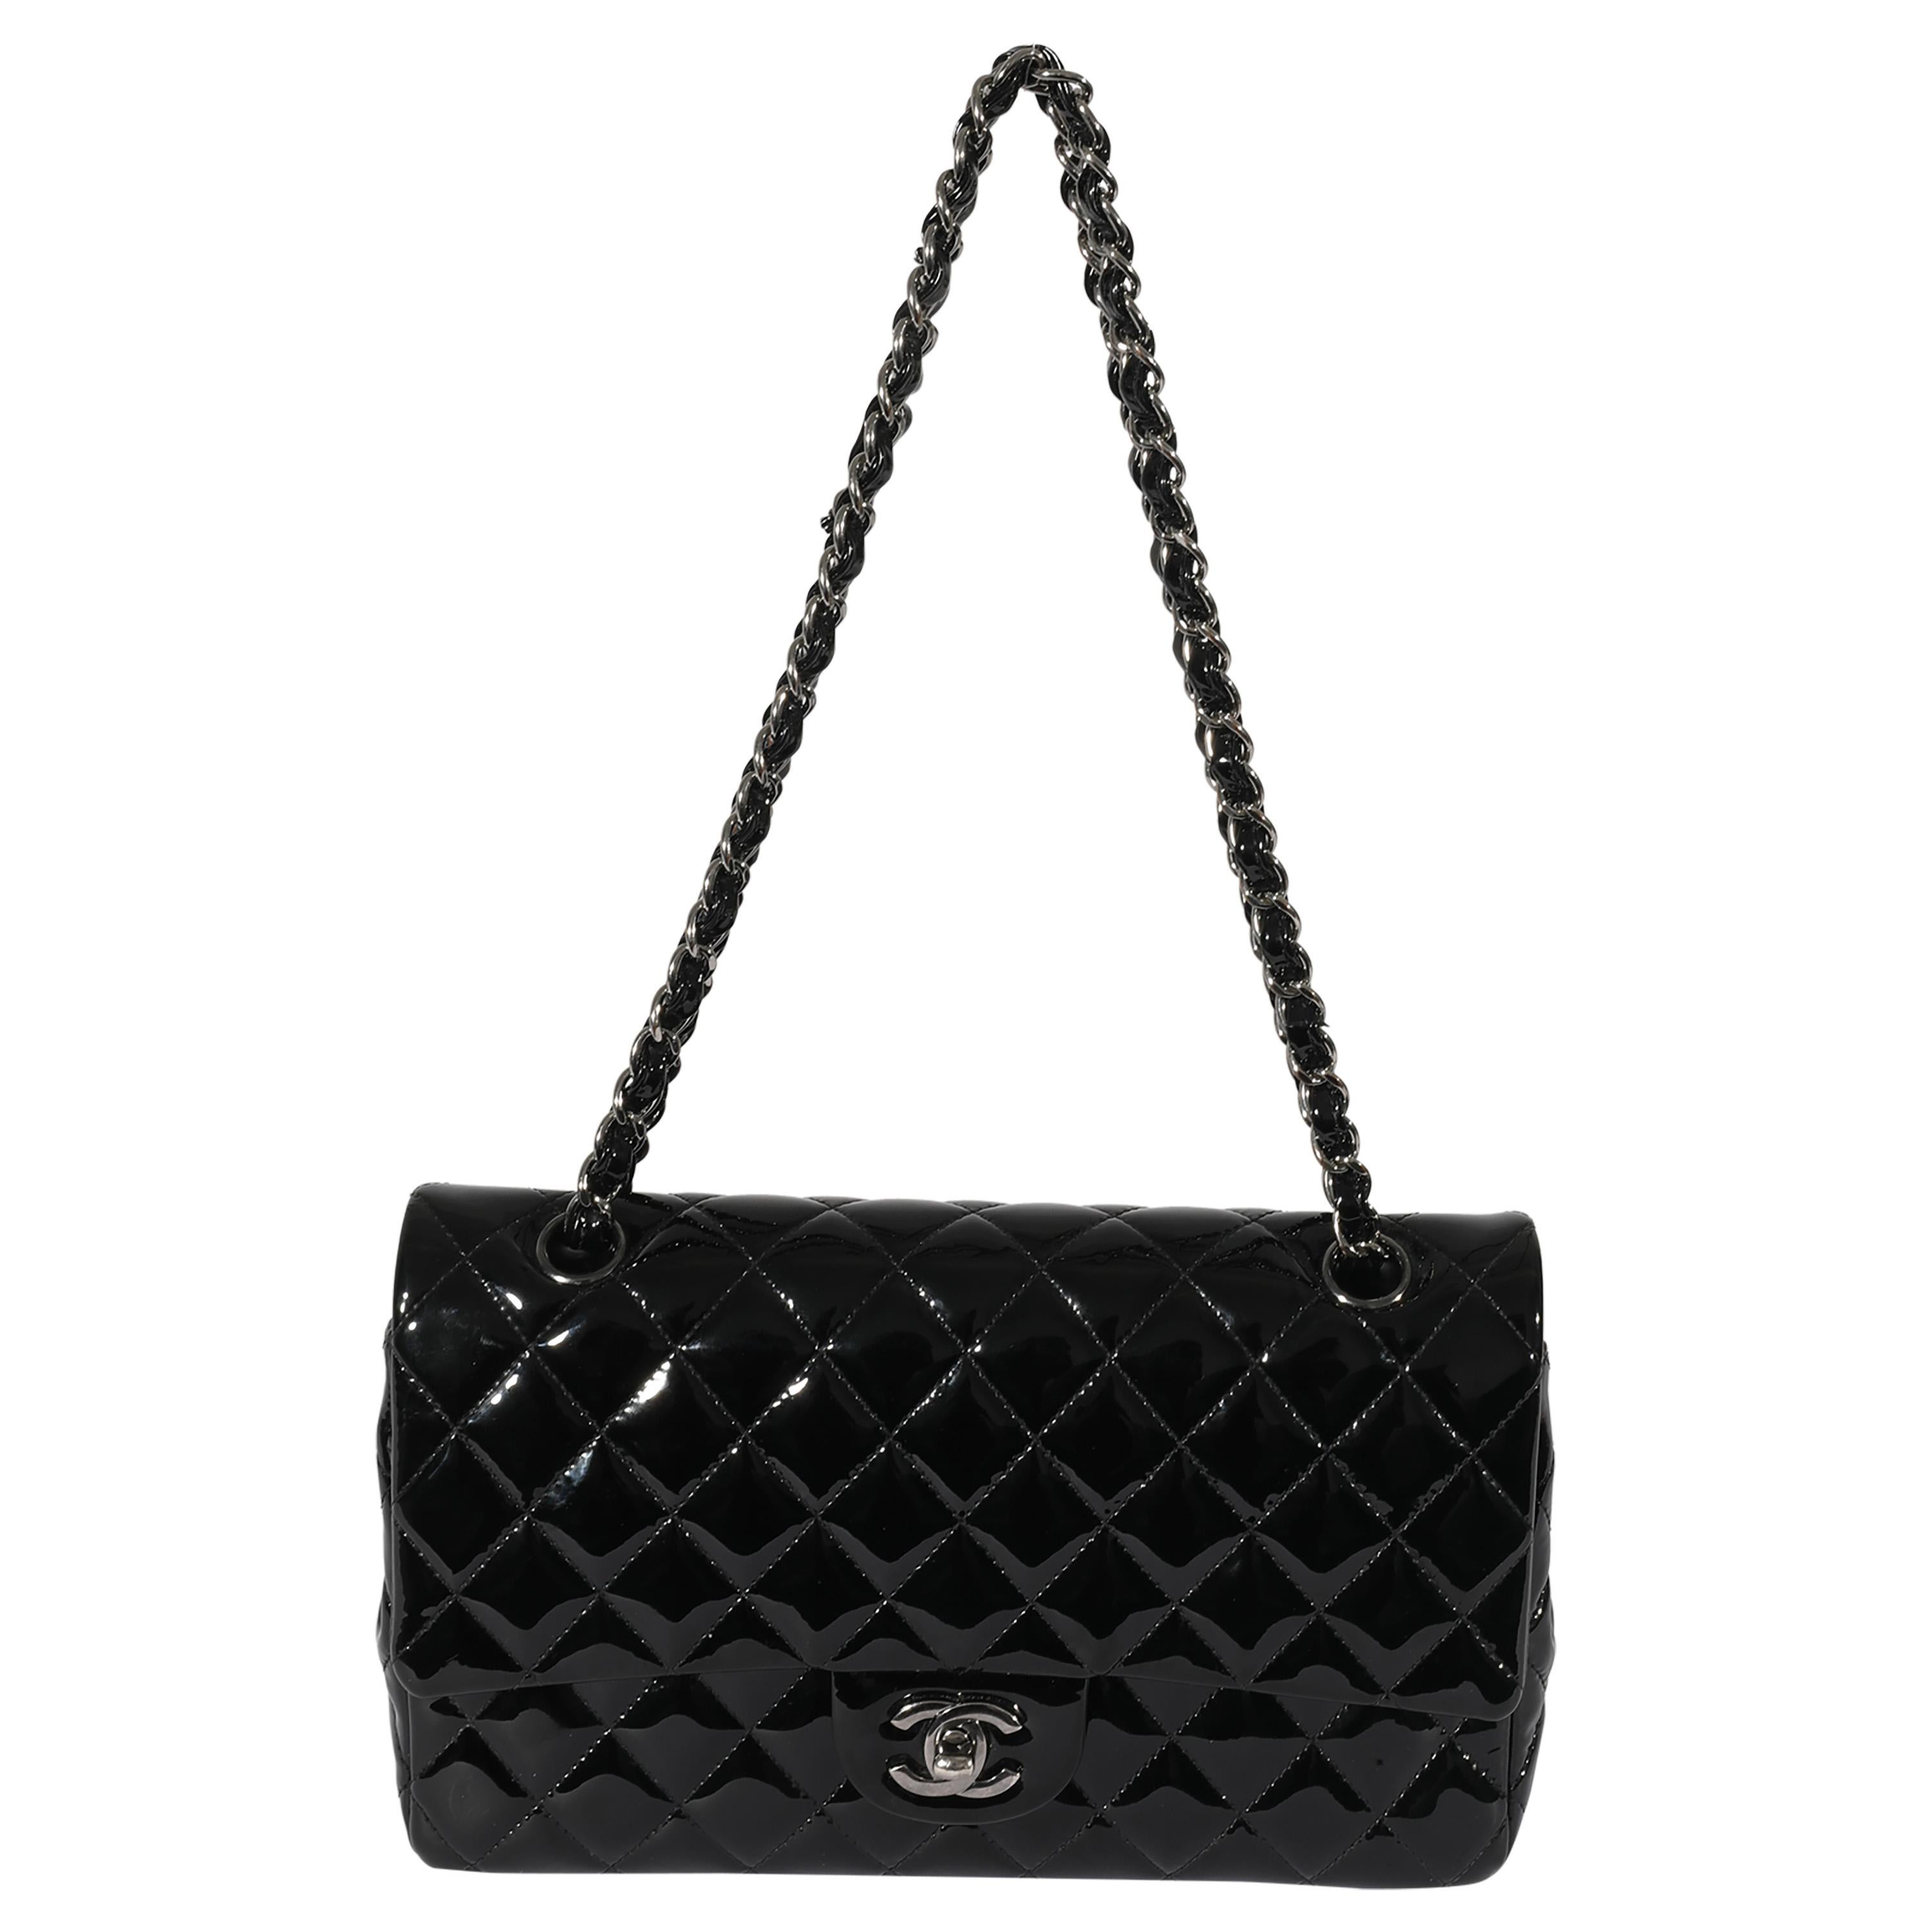 Listing Title: Chanel Black Patent Medium Classic Double Flap
SKU: 127978
MSRP: 8800.00
Condition: Pre-owned 
Handbag Condition: Very Good
Condition Comments: Very Good Condition. Smudging to exterior. Scratching and light tarnishing to hardware.